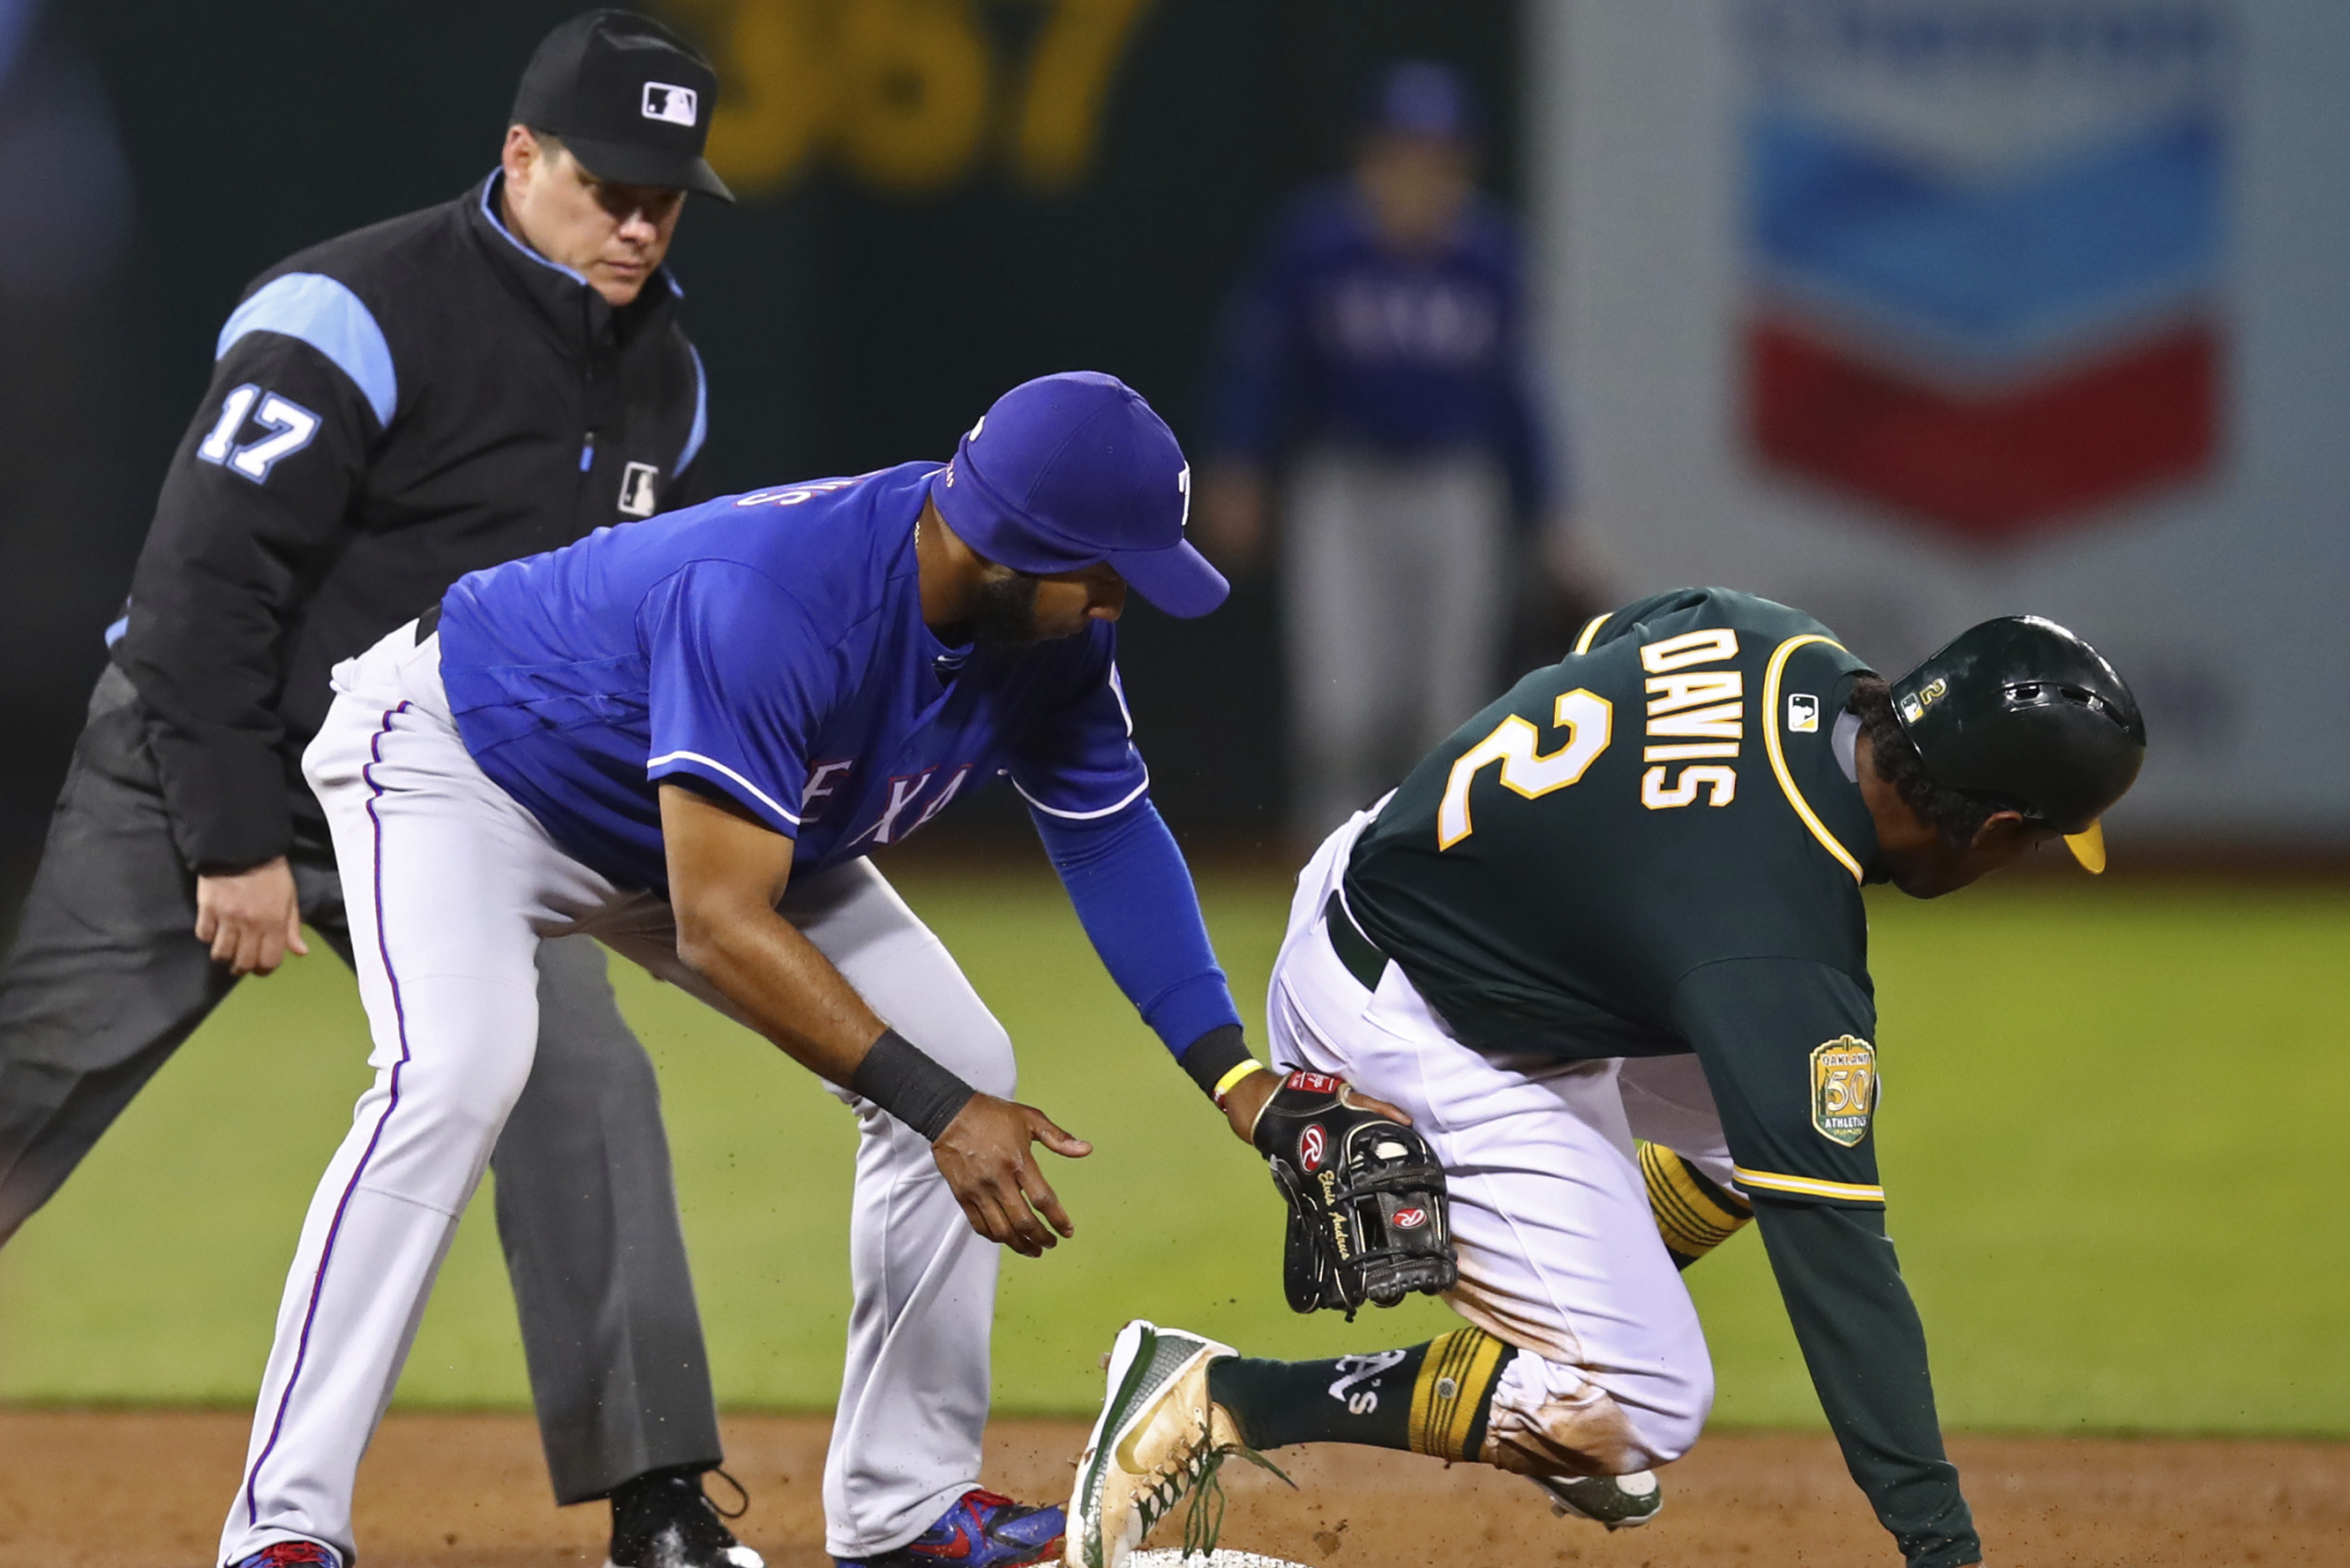 Khris Davis Traded to Rangers from A's for Elvis Andrus